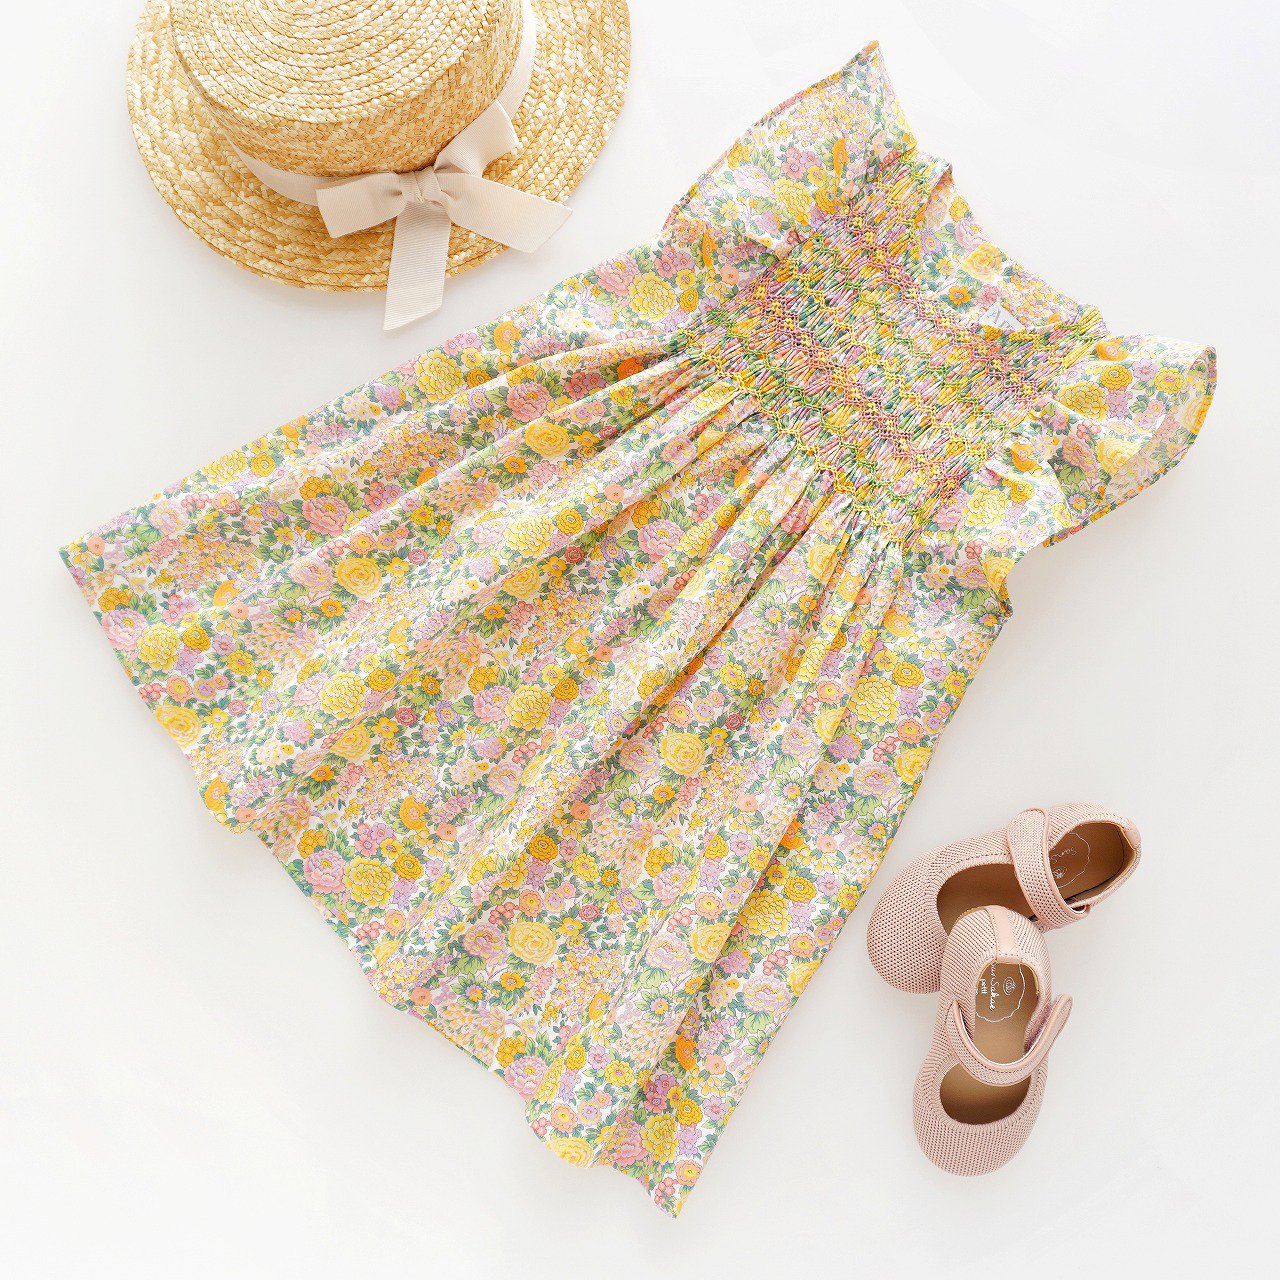 <img class='new_mark_img1' src='https://img.shop-pro.jp/img/new/icons1.gif' style='border:none;display:inline;margin:0px;padding:0px;width:auto;' />Amaia Kids - Amelie dress (Liberty Elysian Day)